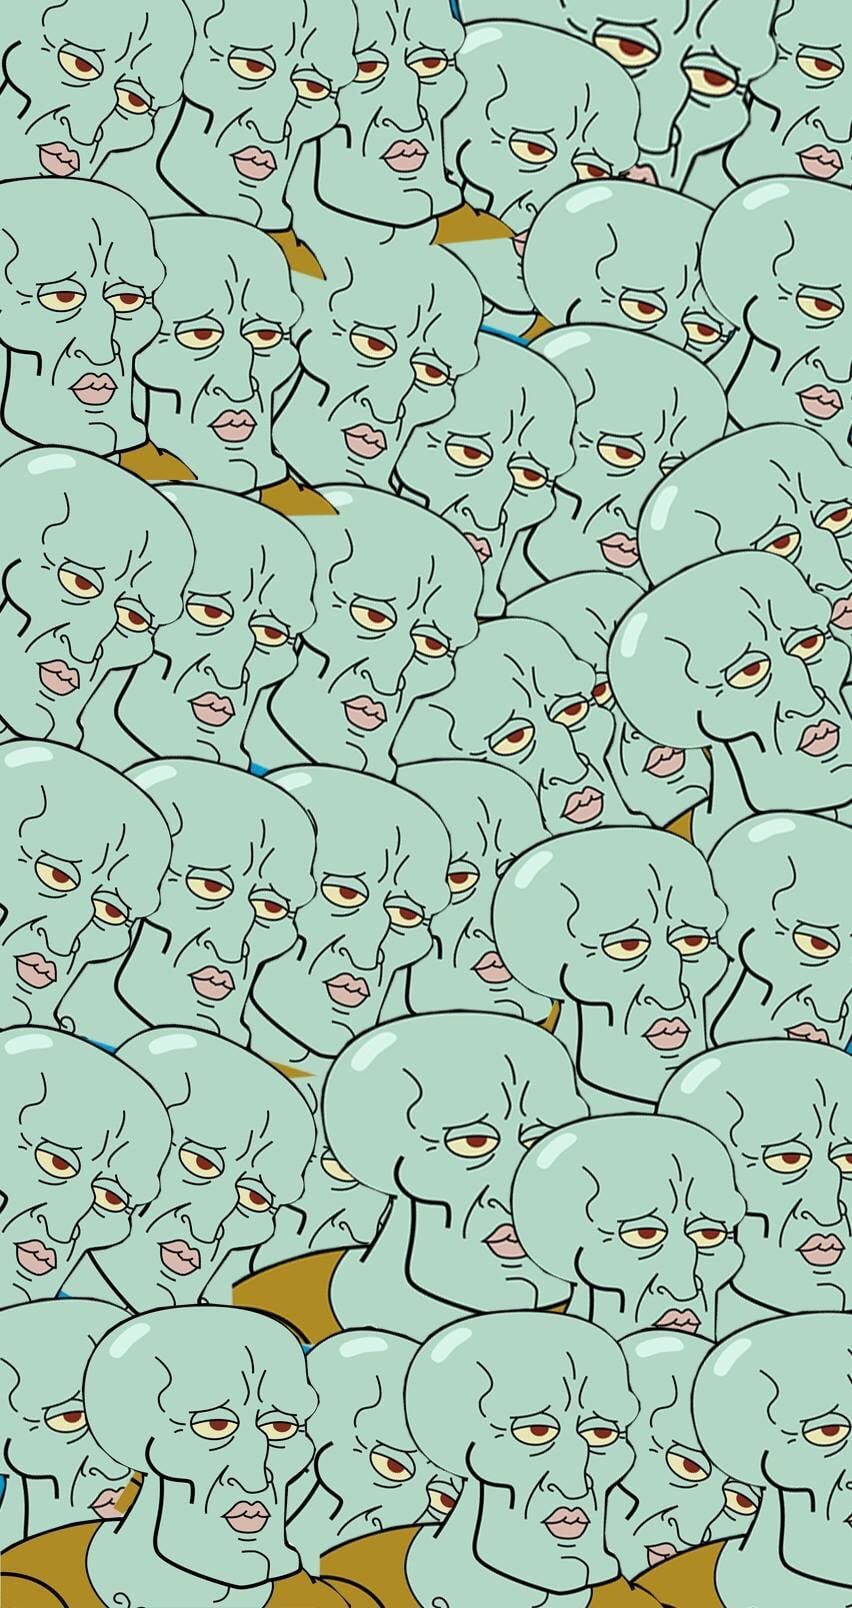 Beautiful Squidward wallpaper made by me :)